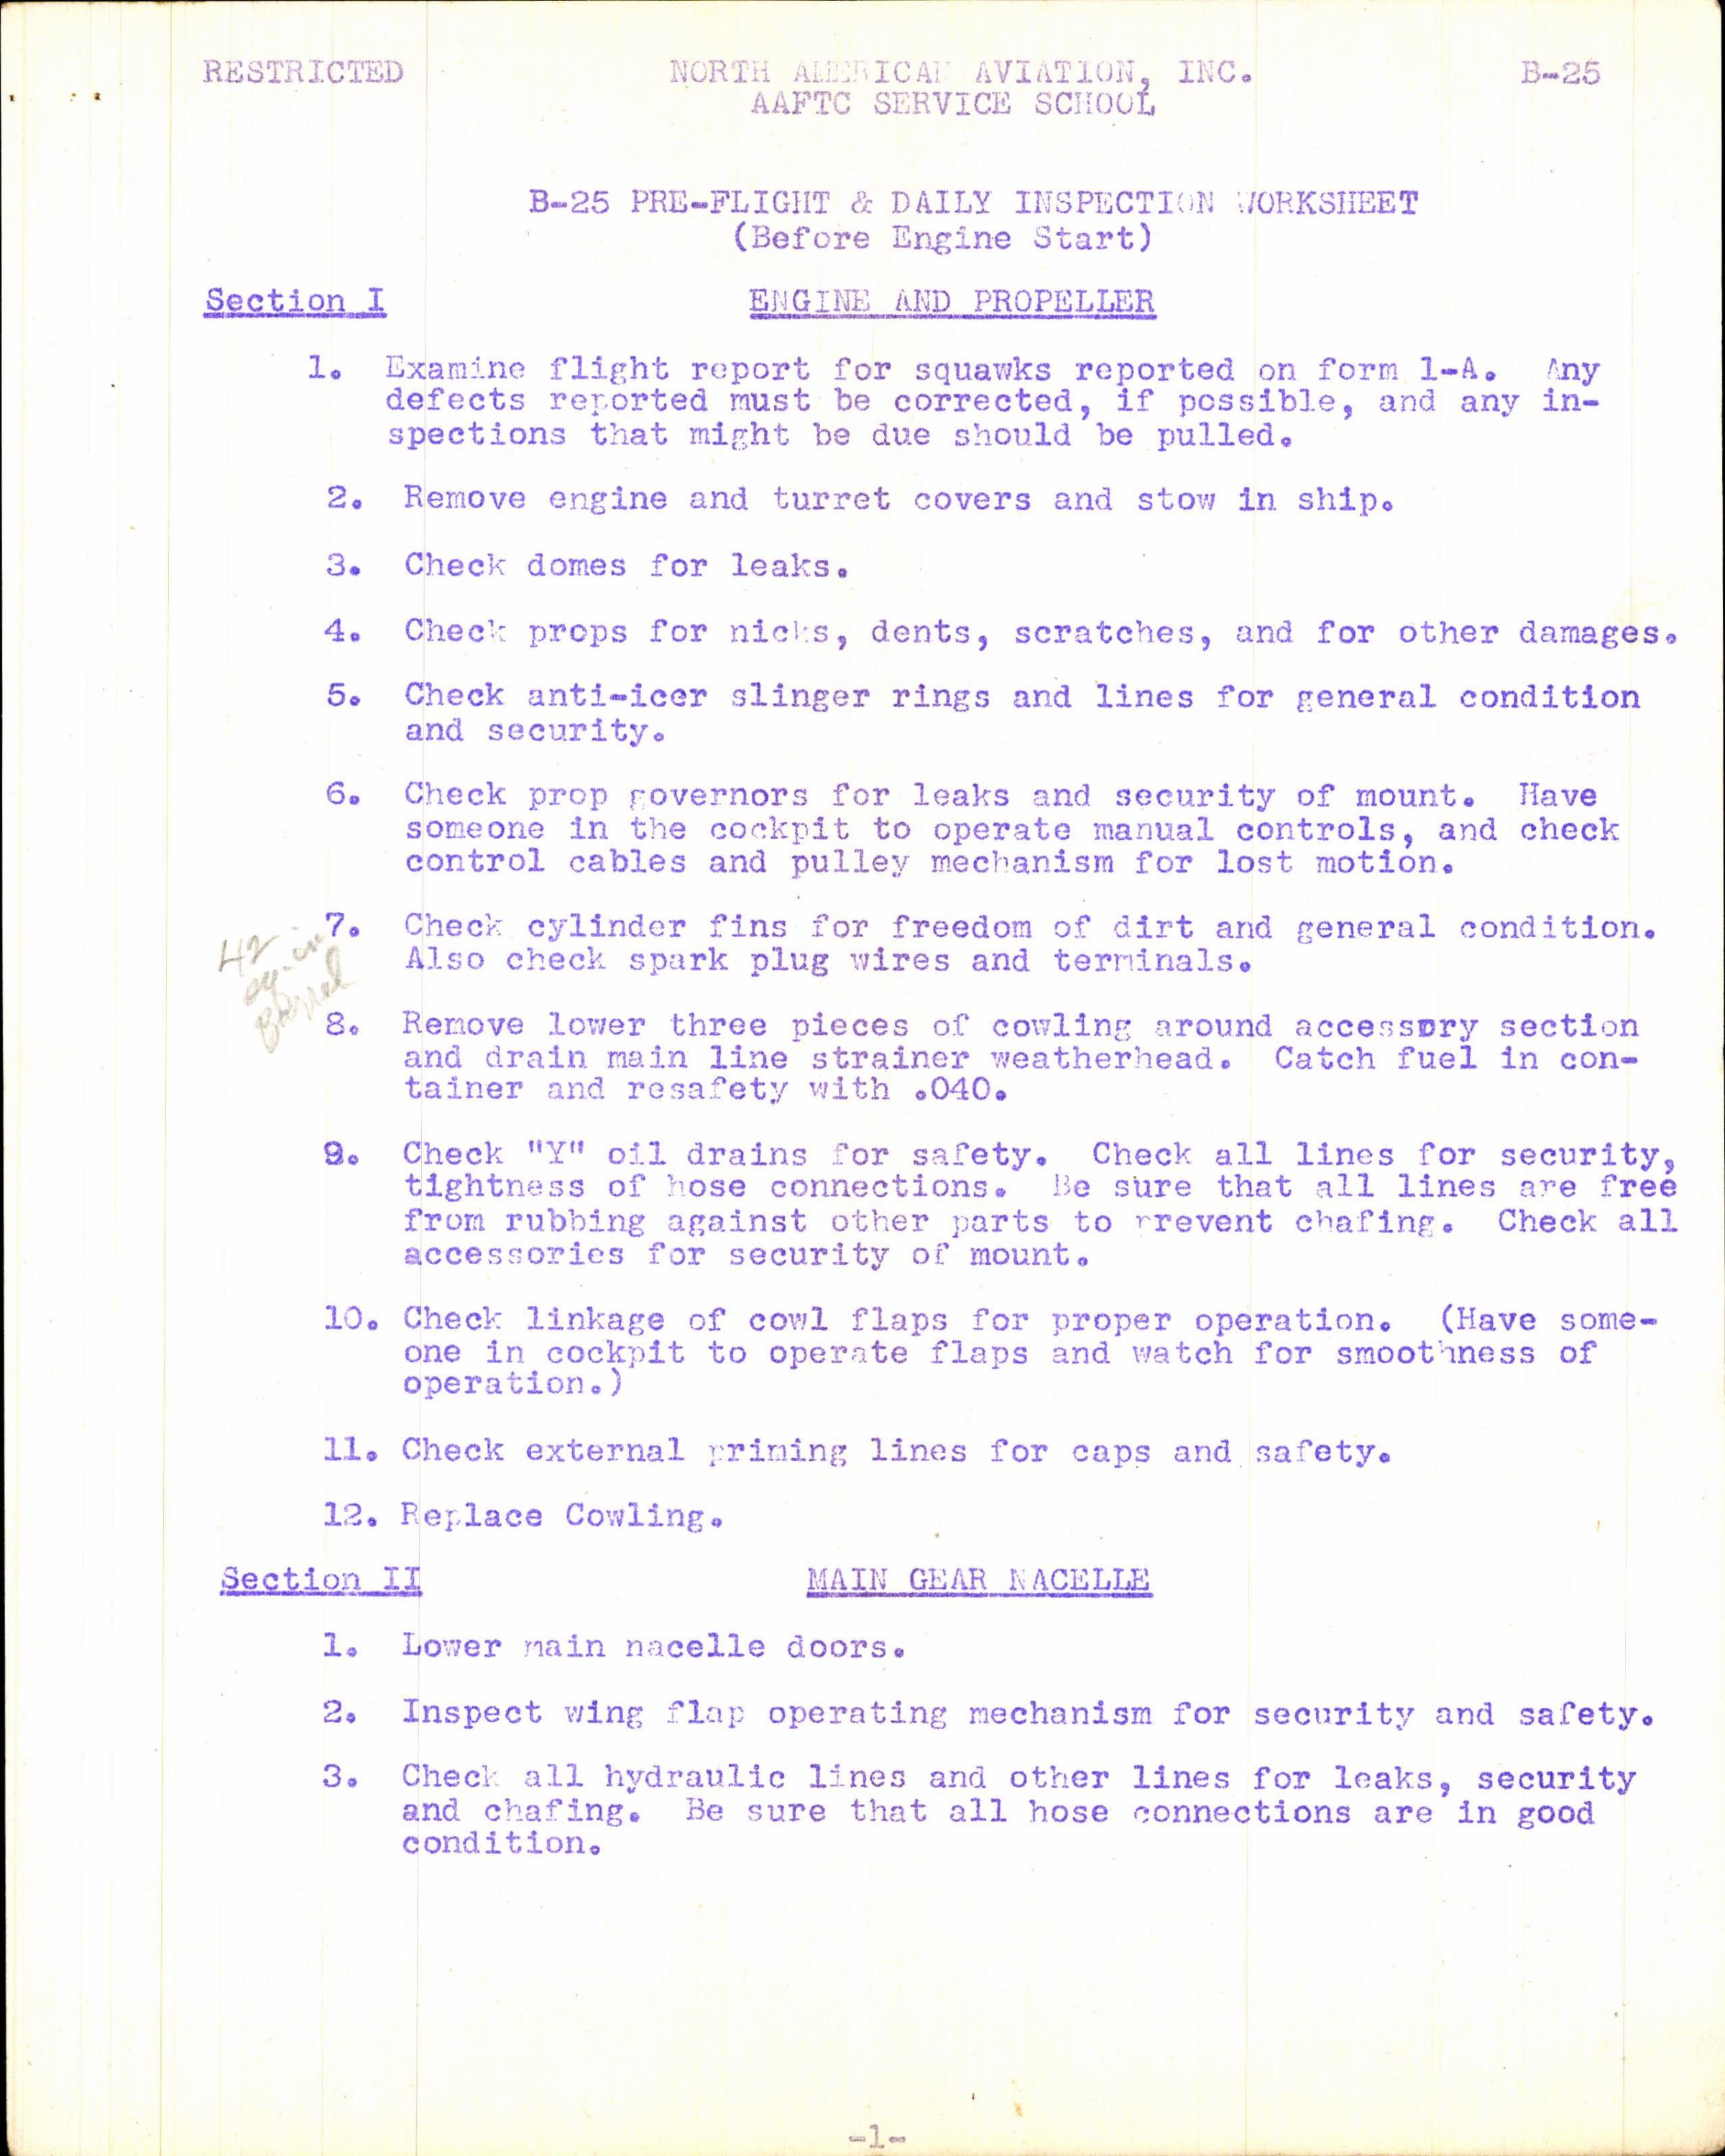 Sample page 3 from AirCorps Library document: Pre-Flight and Daily Inspection for B-25